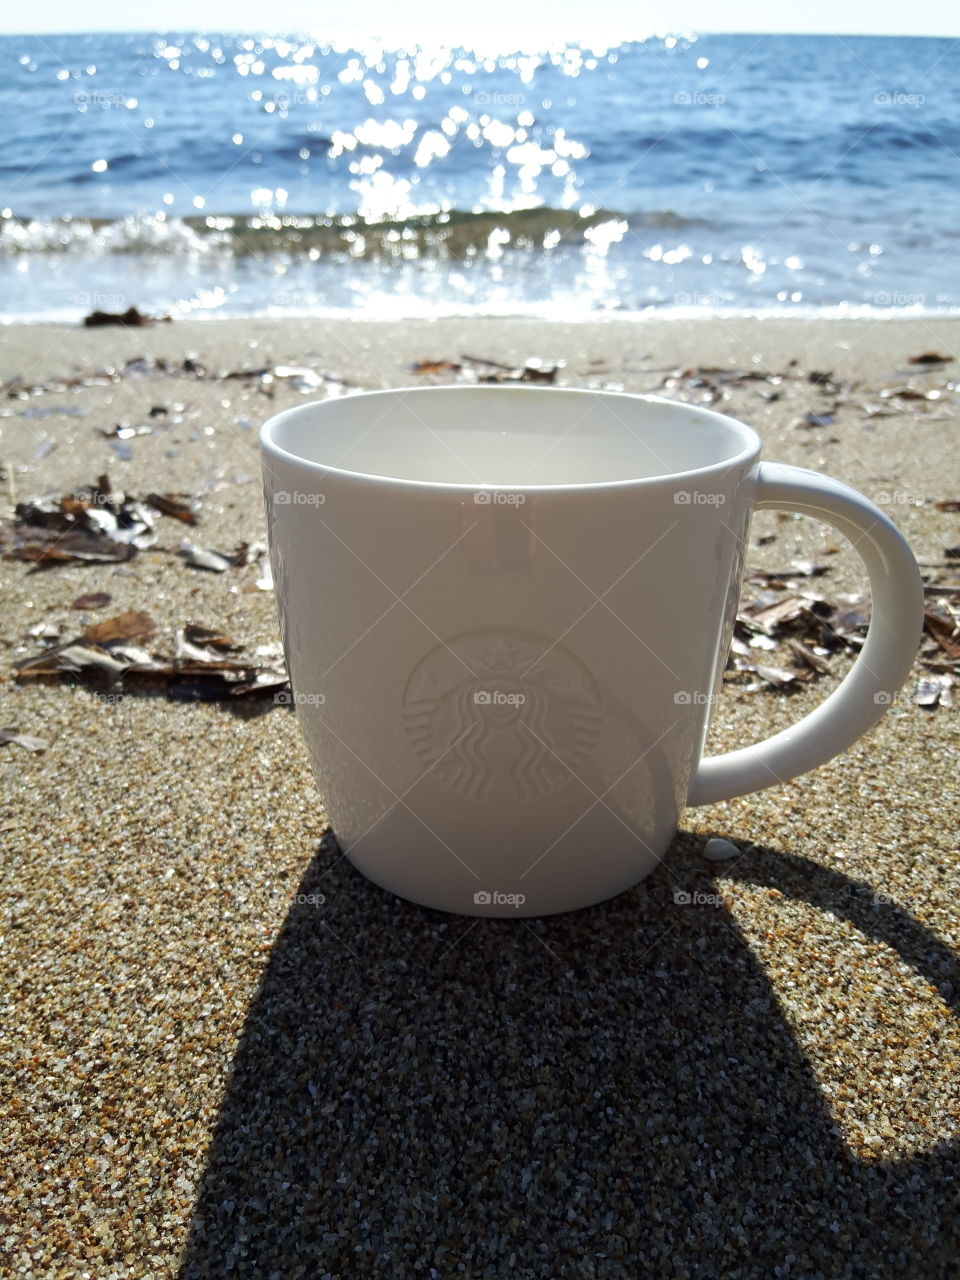 cup of coffe in the sea